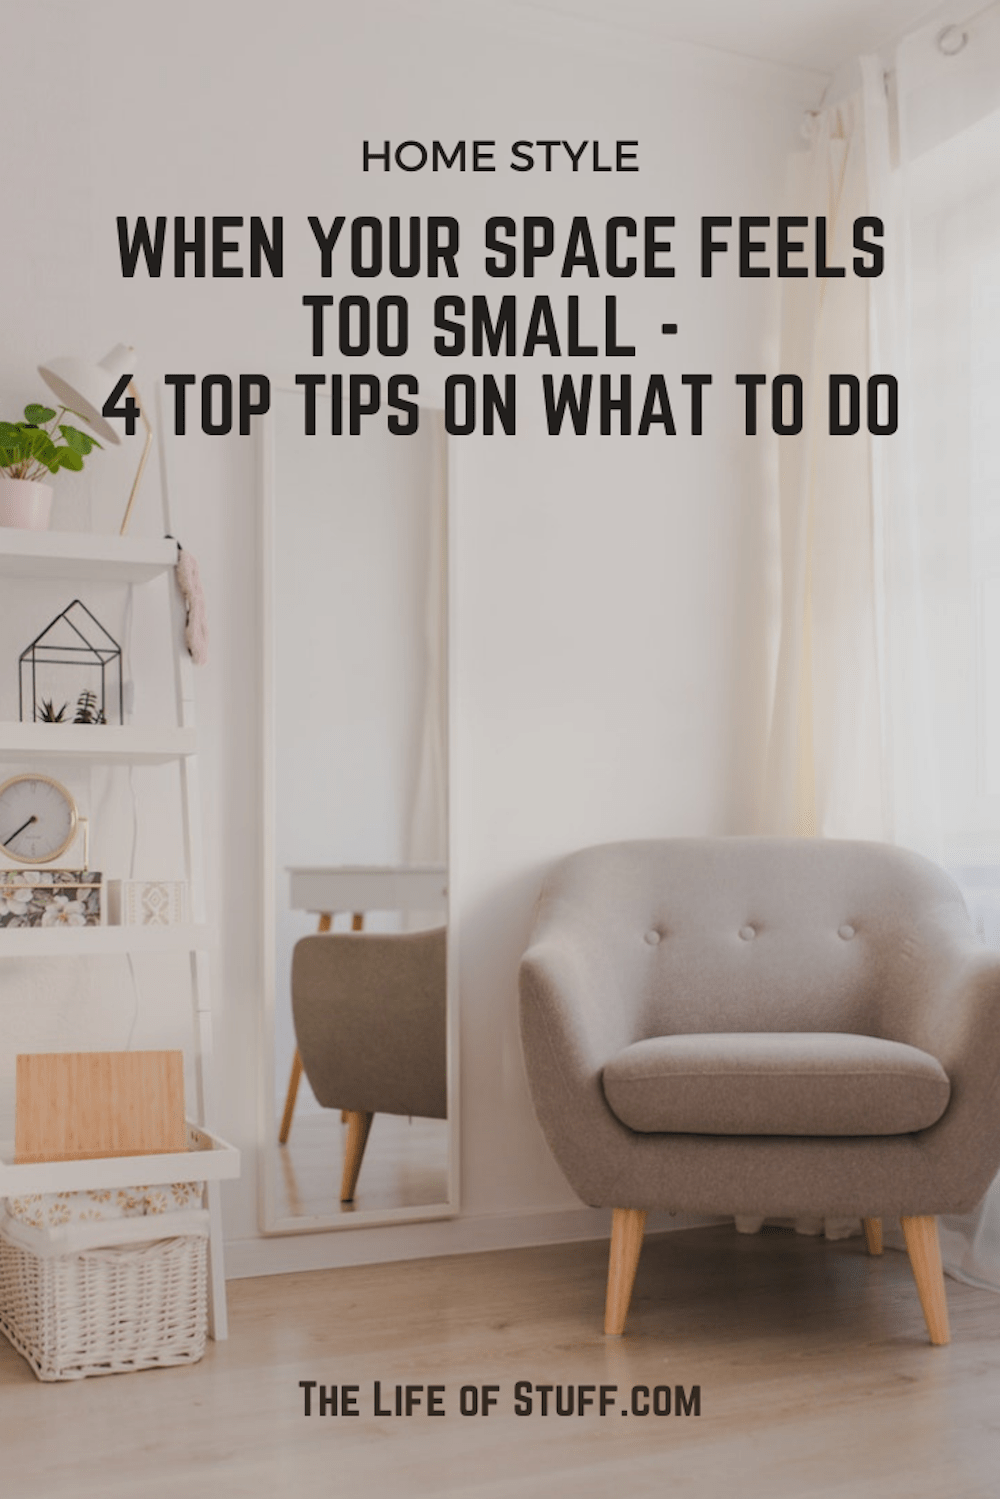 When Your Space Feels Too Small - 4 Top Tips on What to Do - The Life of Stuff